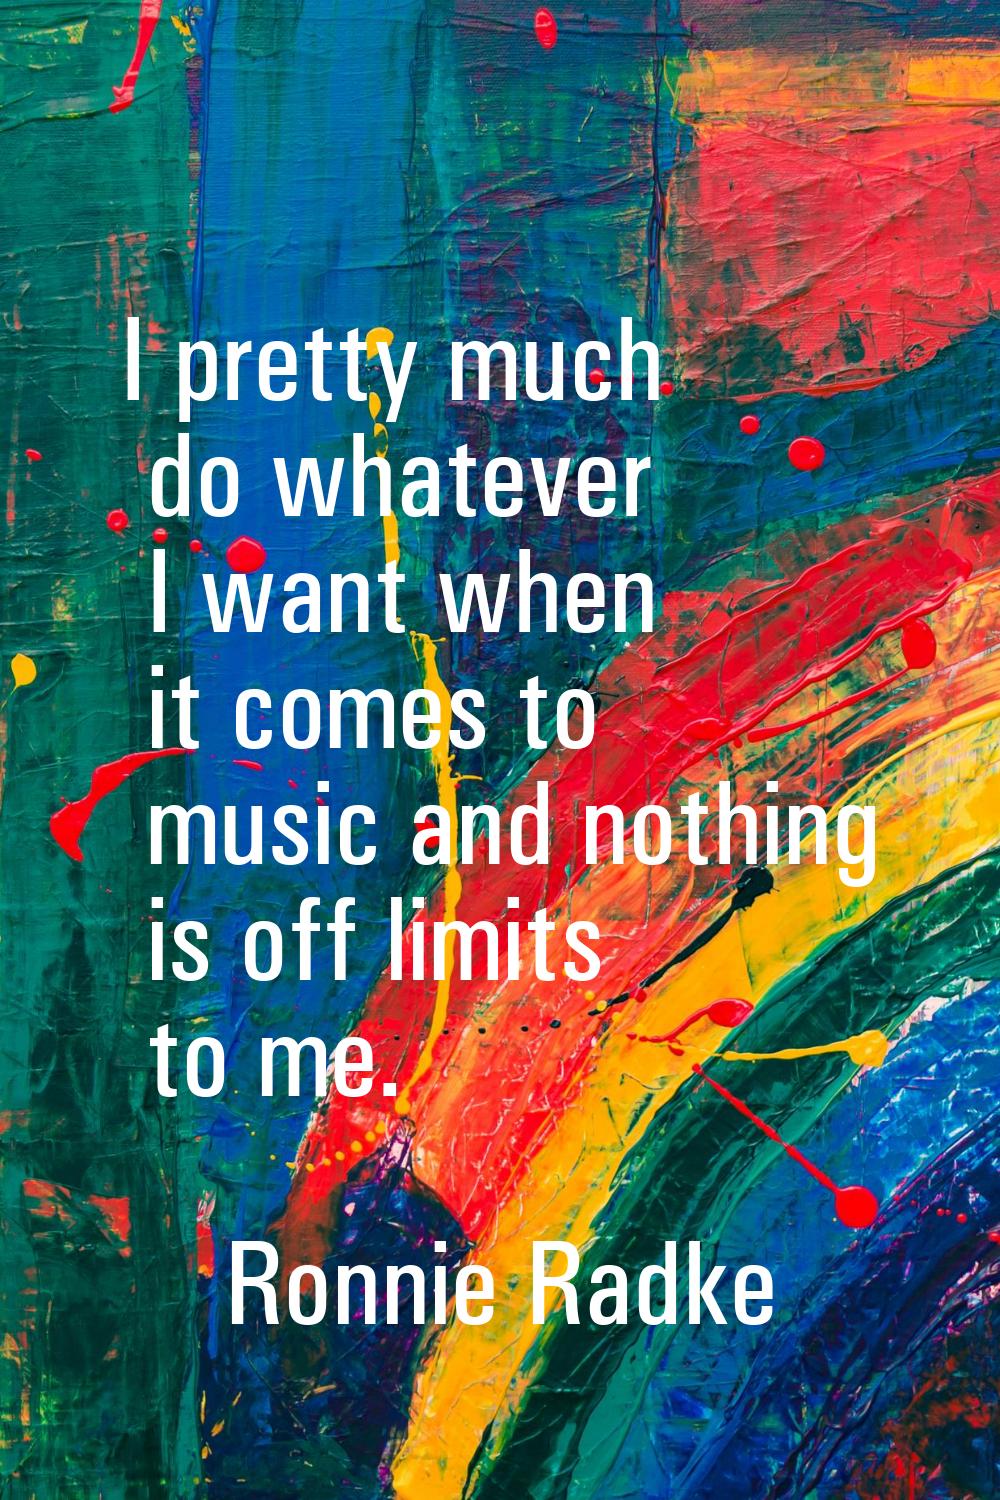 I pretty much do whatever I want when it comes to music and nothing is off limits to me.